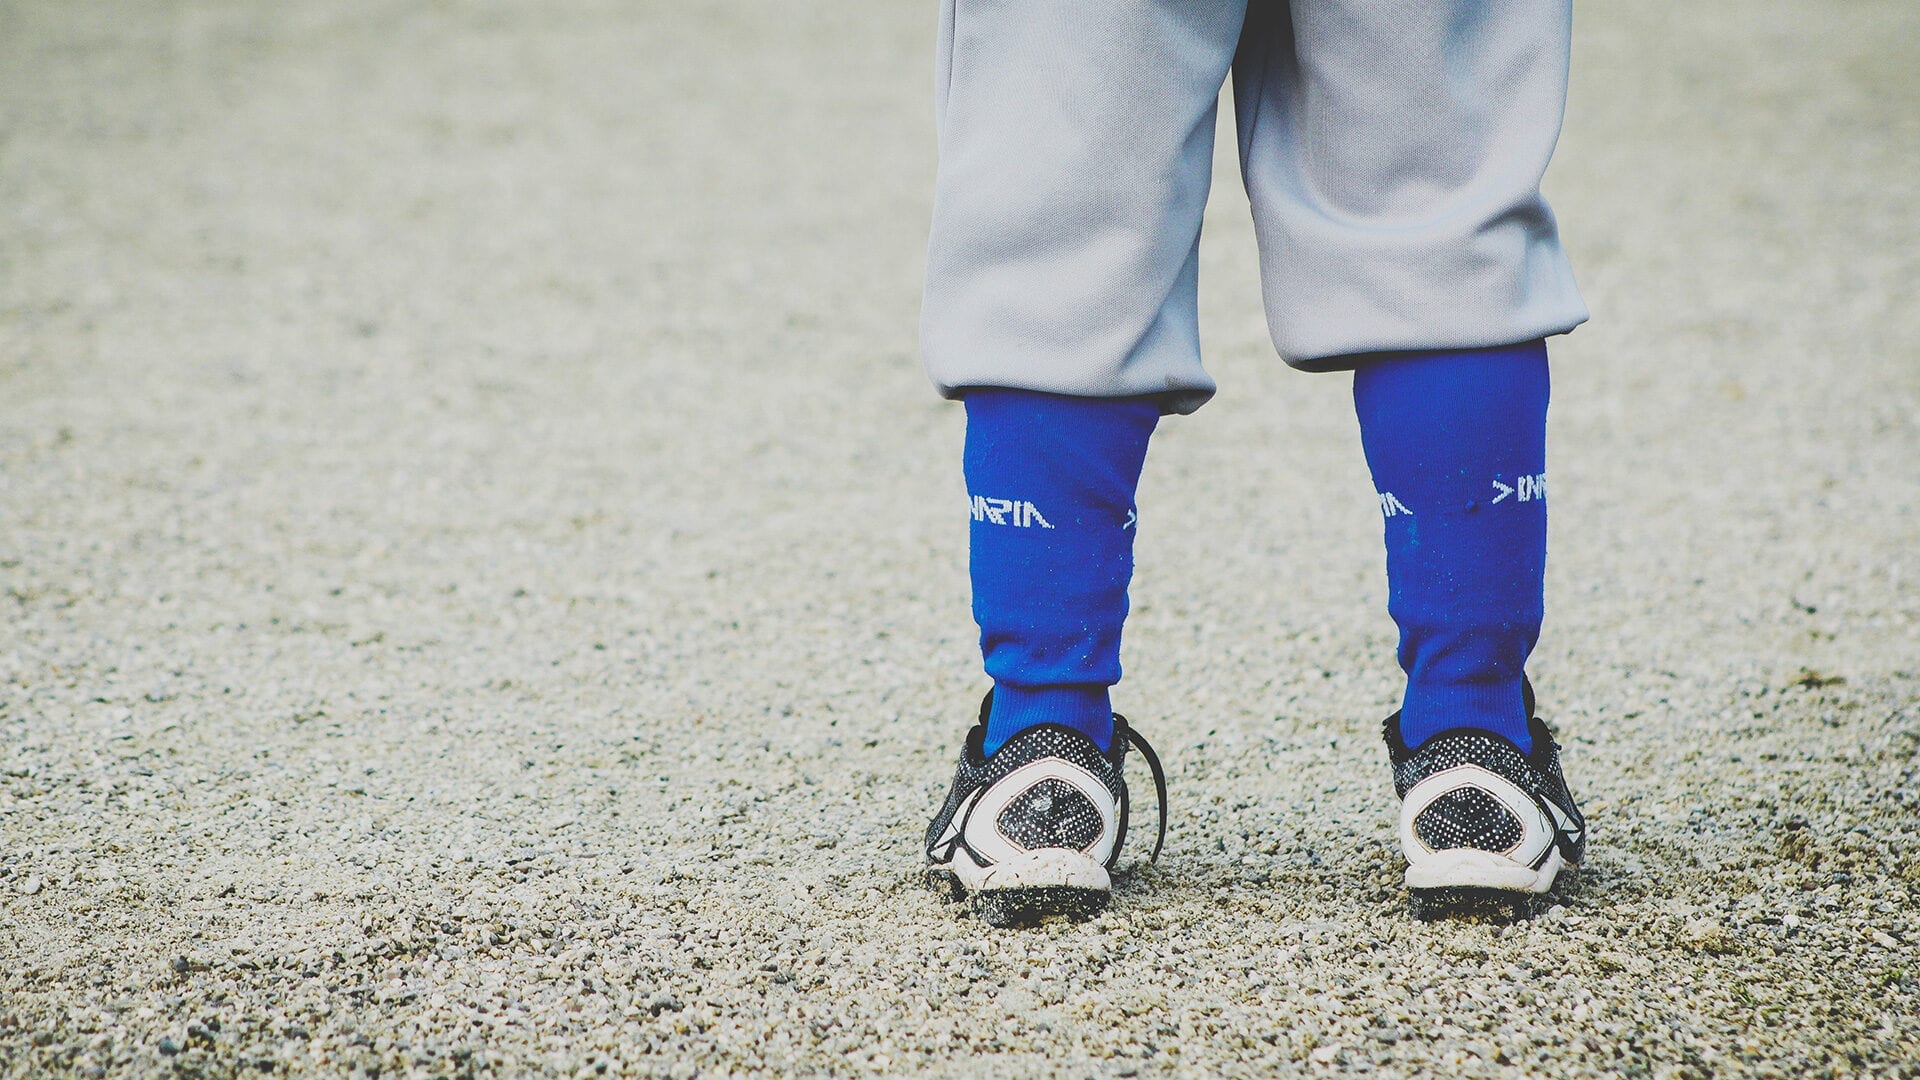 A child's ankles dressed in sports socks and cleats